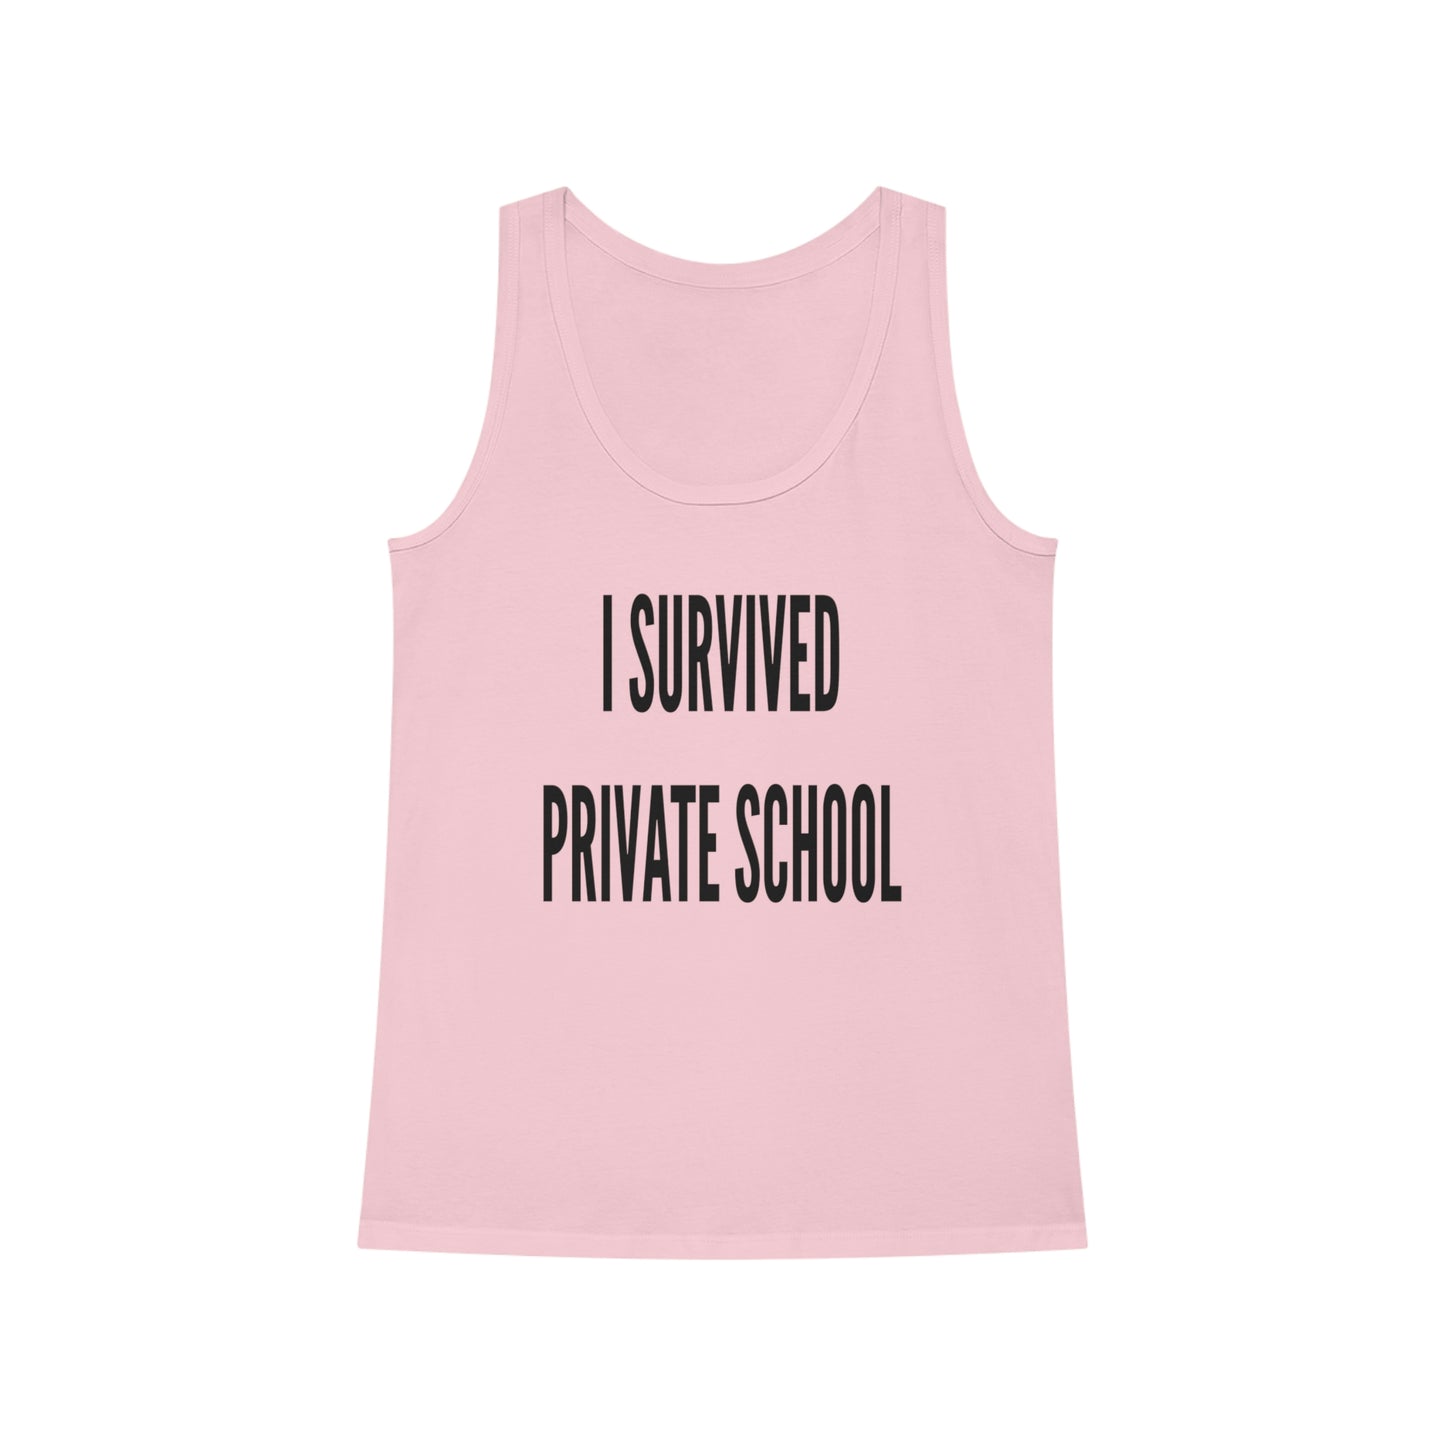 I Survived Private School Sleeveless Top